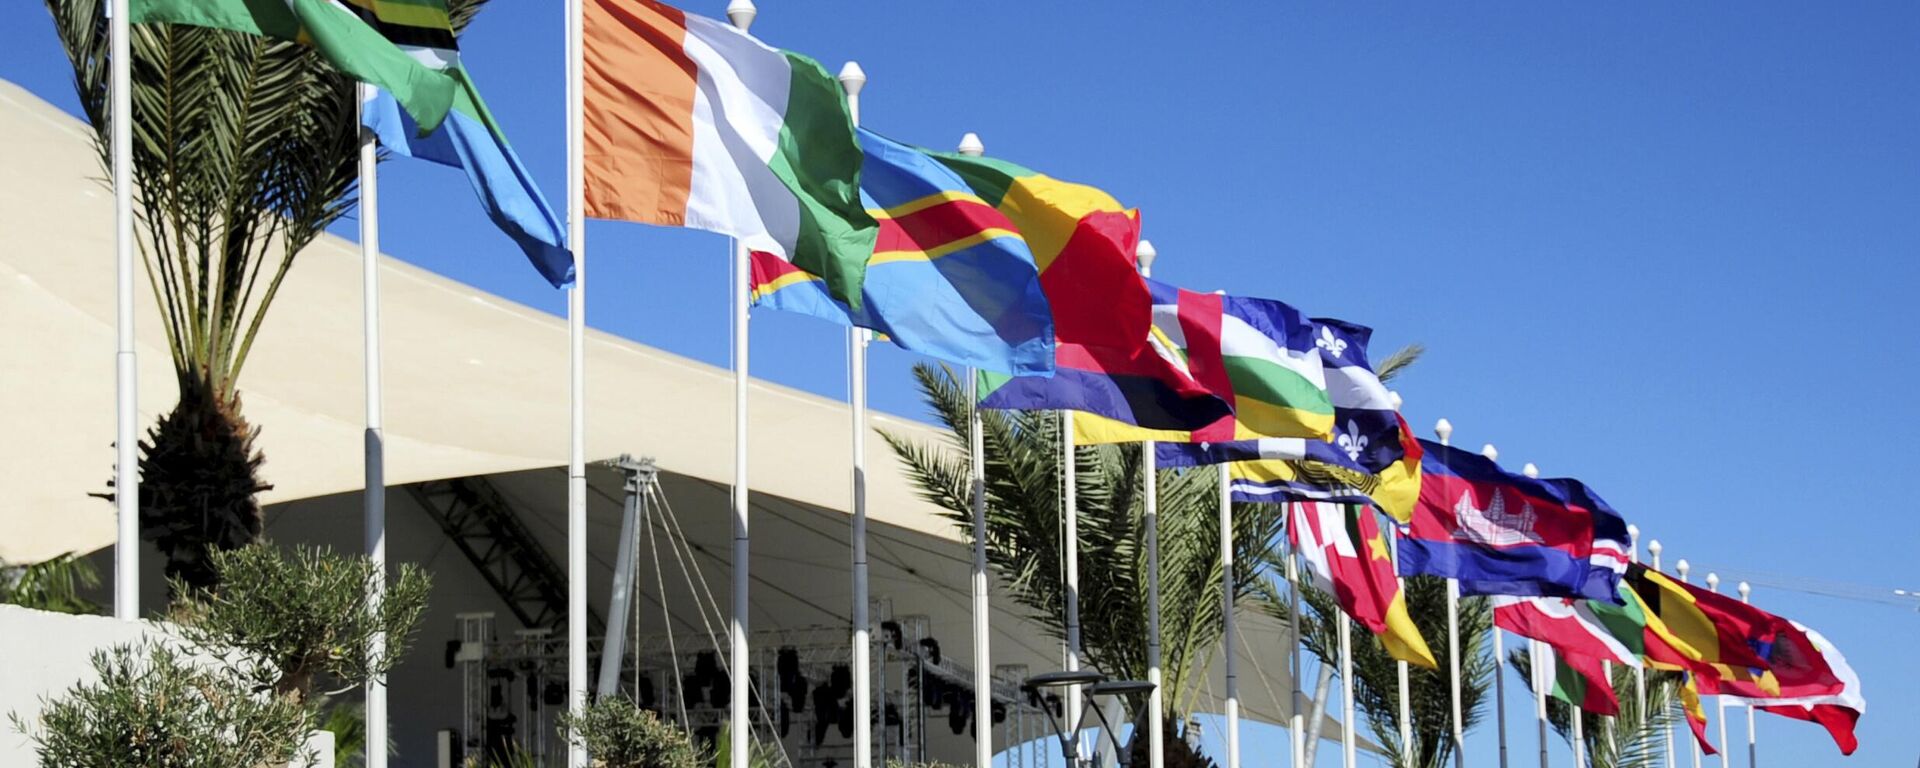 Flags of different countries wave in the wind on the eve of the 18th Francophone Summit in Djerba, Tunisia, Friday, Nov. 18, 2022. - Sputnik International, 1920, 20.11.2022